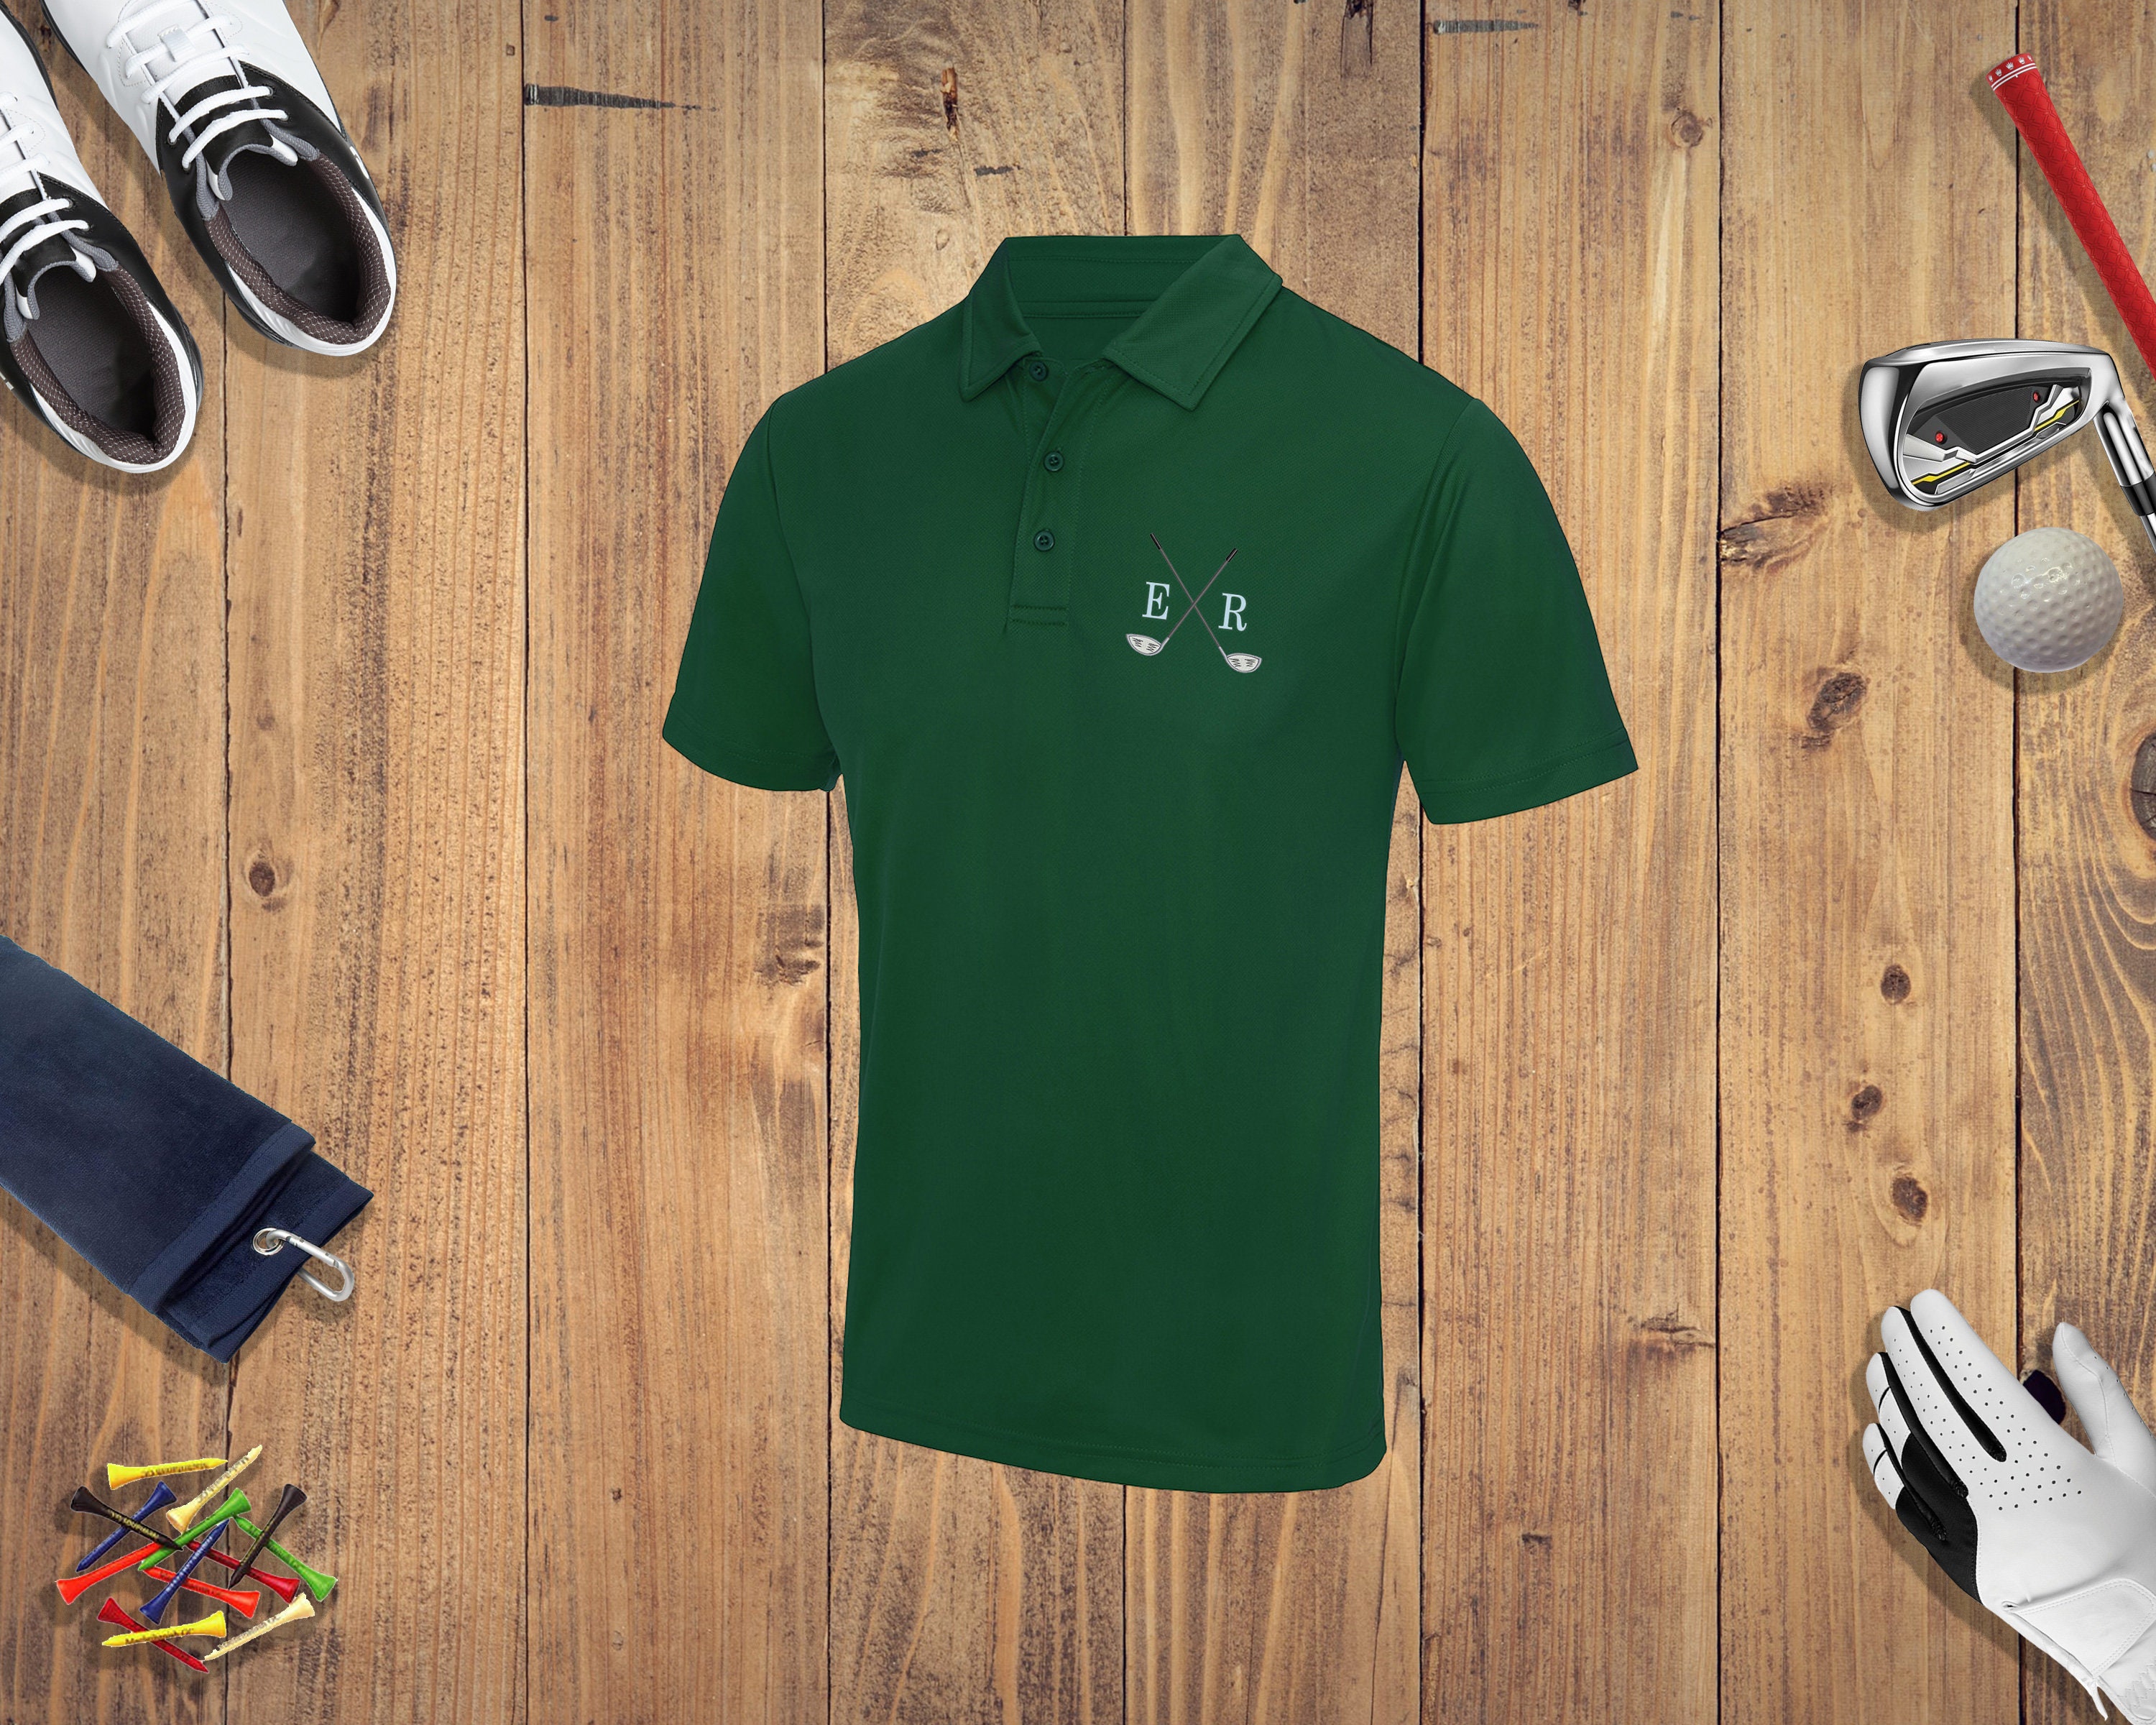 Personalised Embroidered Initials Golf Polo Shirt - Cross Clubs Golfwear Gift For Golfer